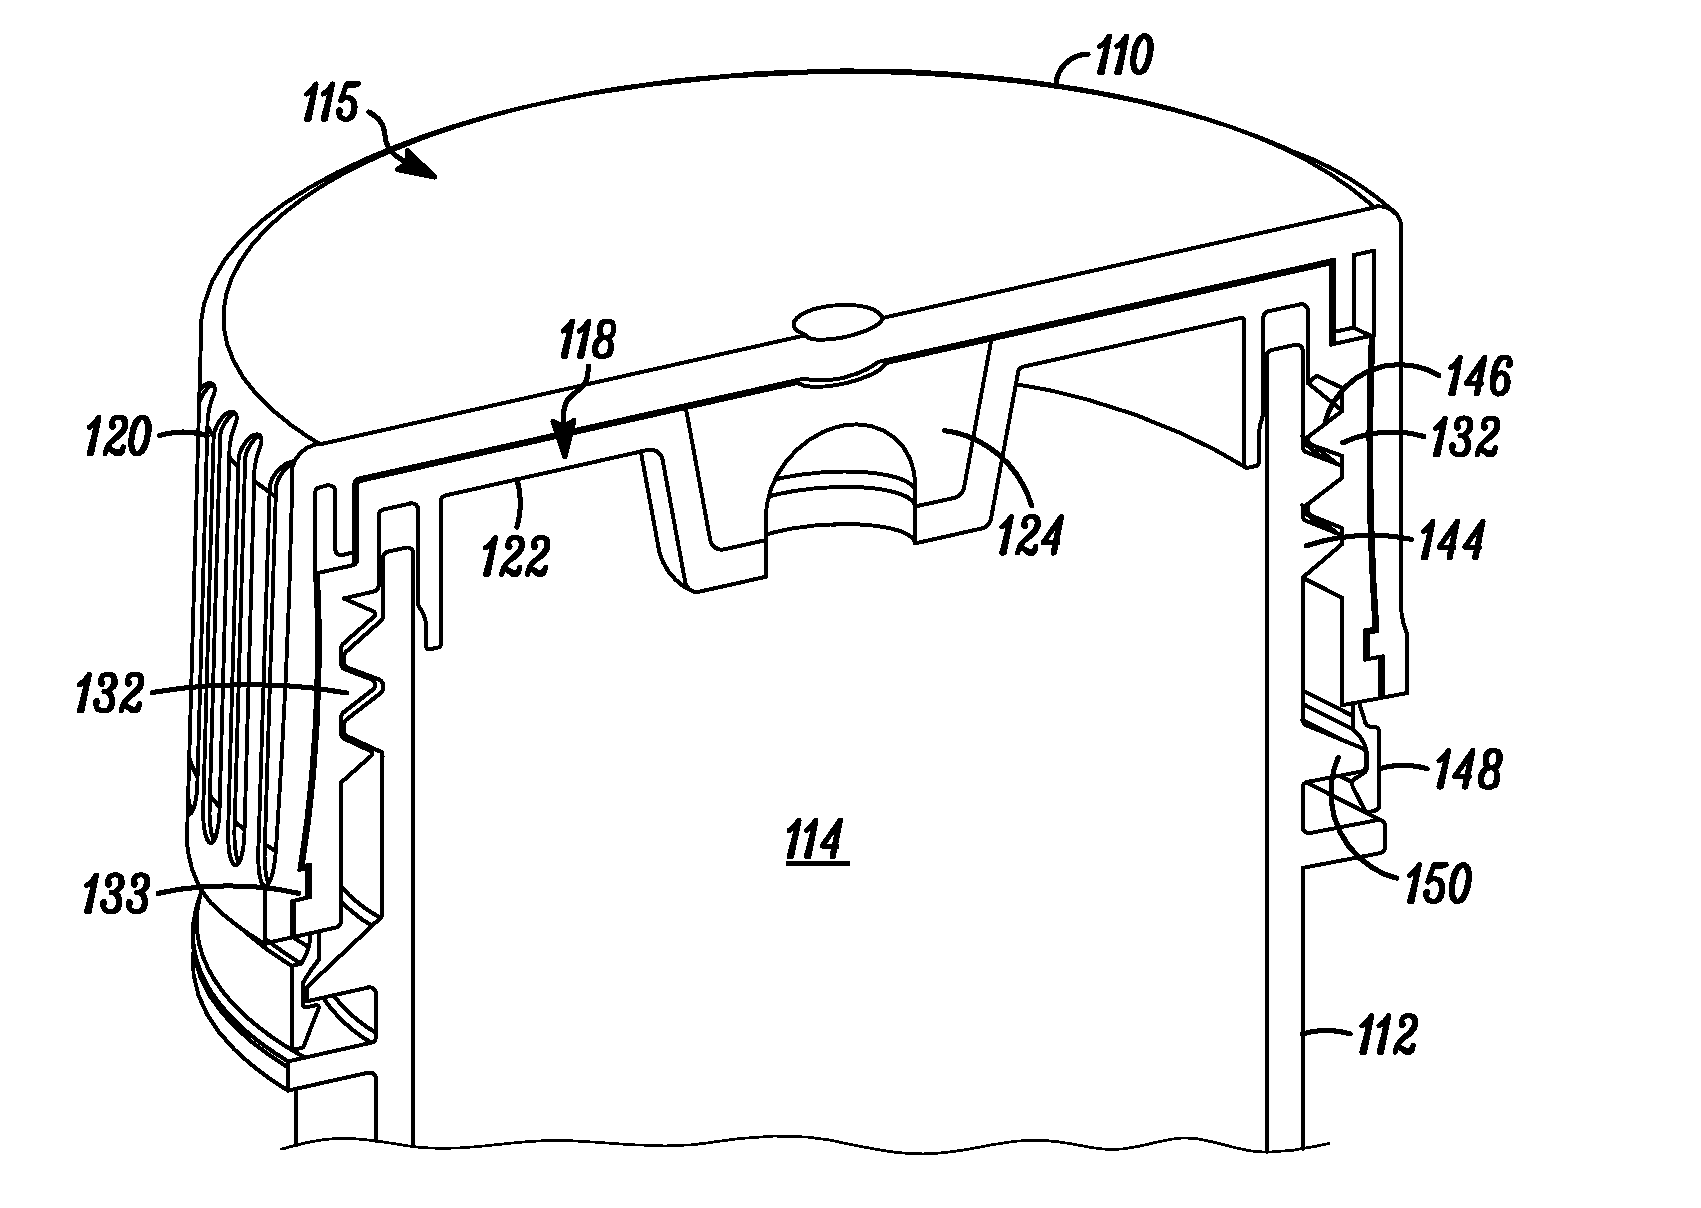 Container Closure with Overlying Needle Penetrable and Resealable Portion and Underlying Portion Compatible with Fat Containing Liquid Product, and Related Method